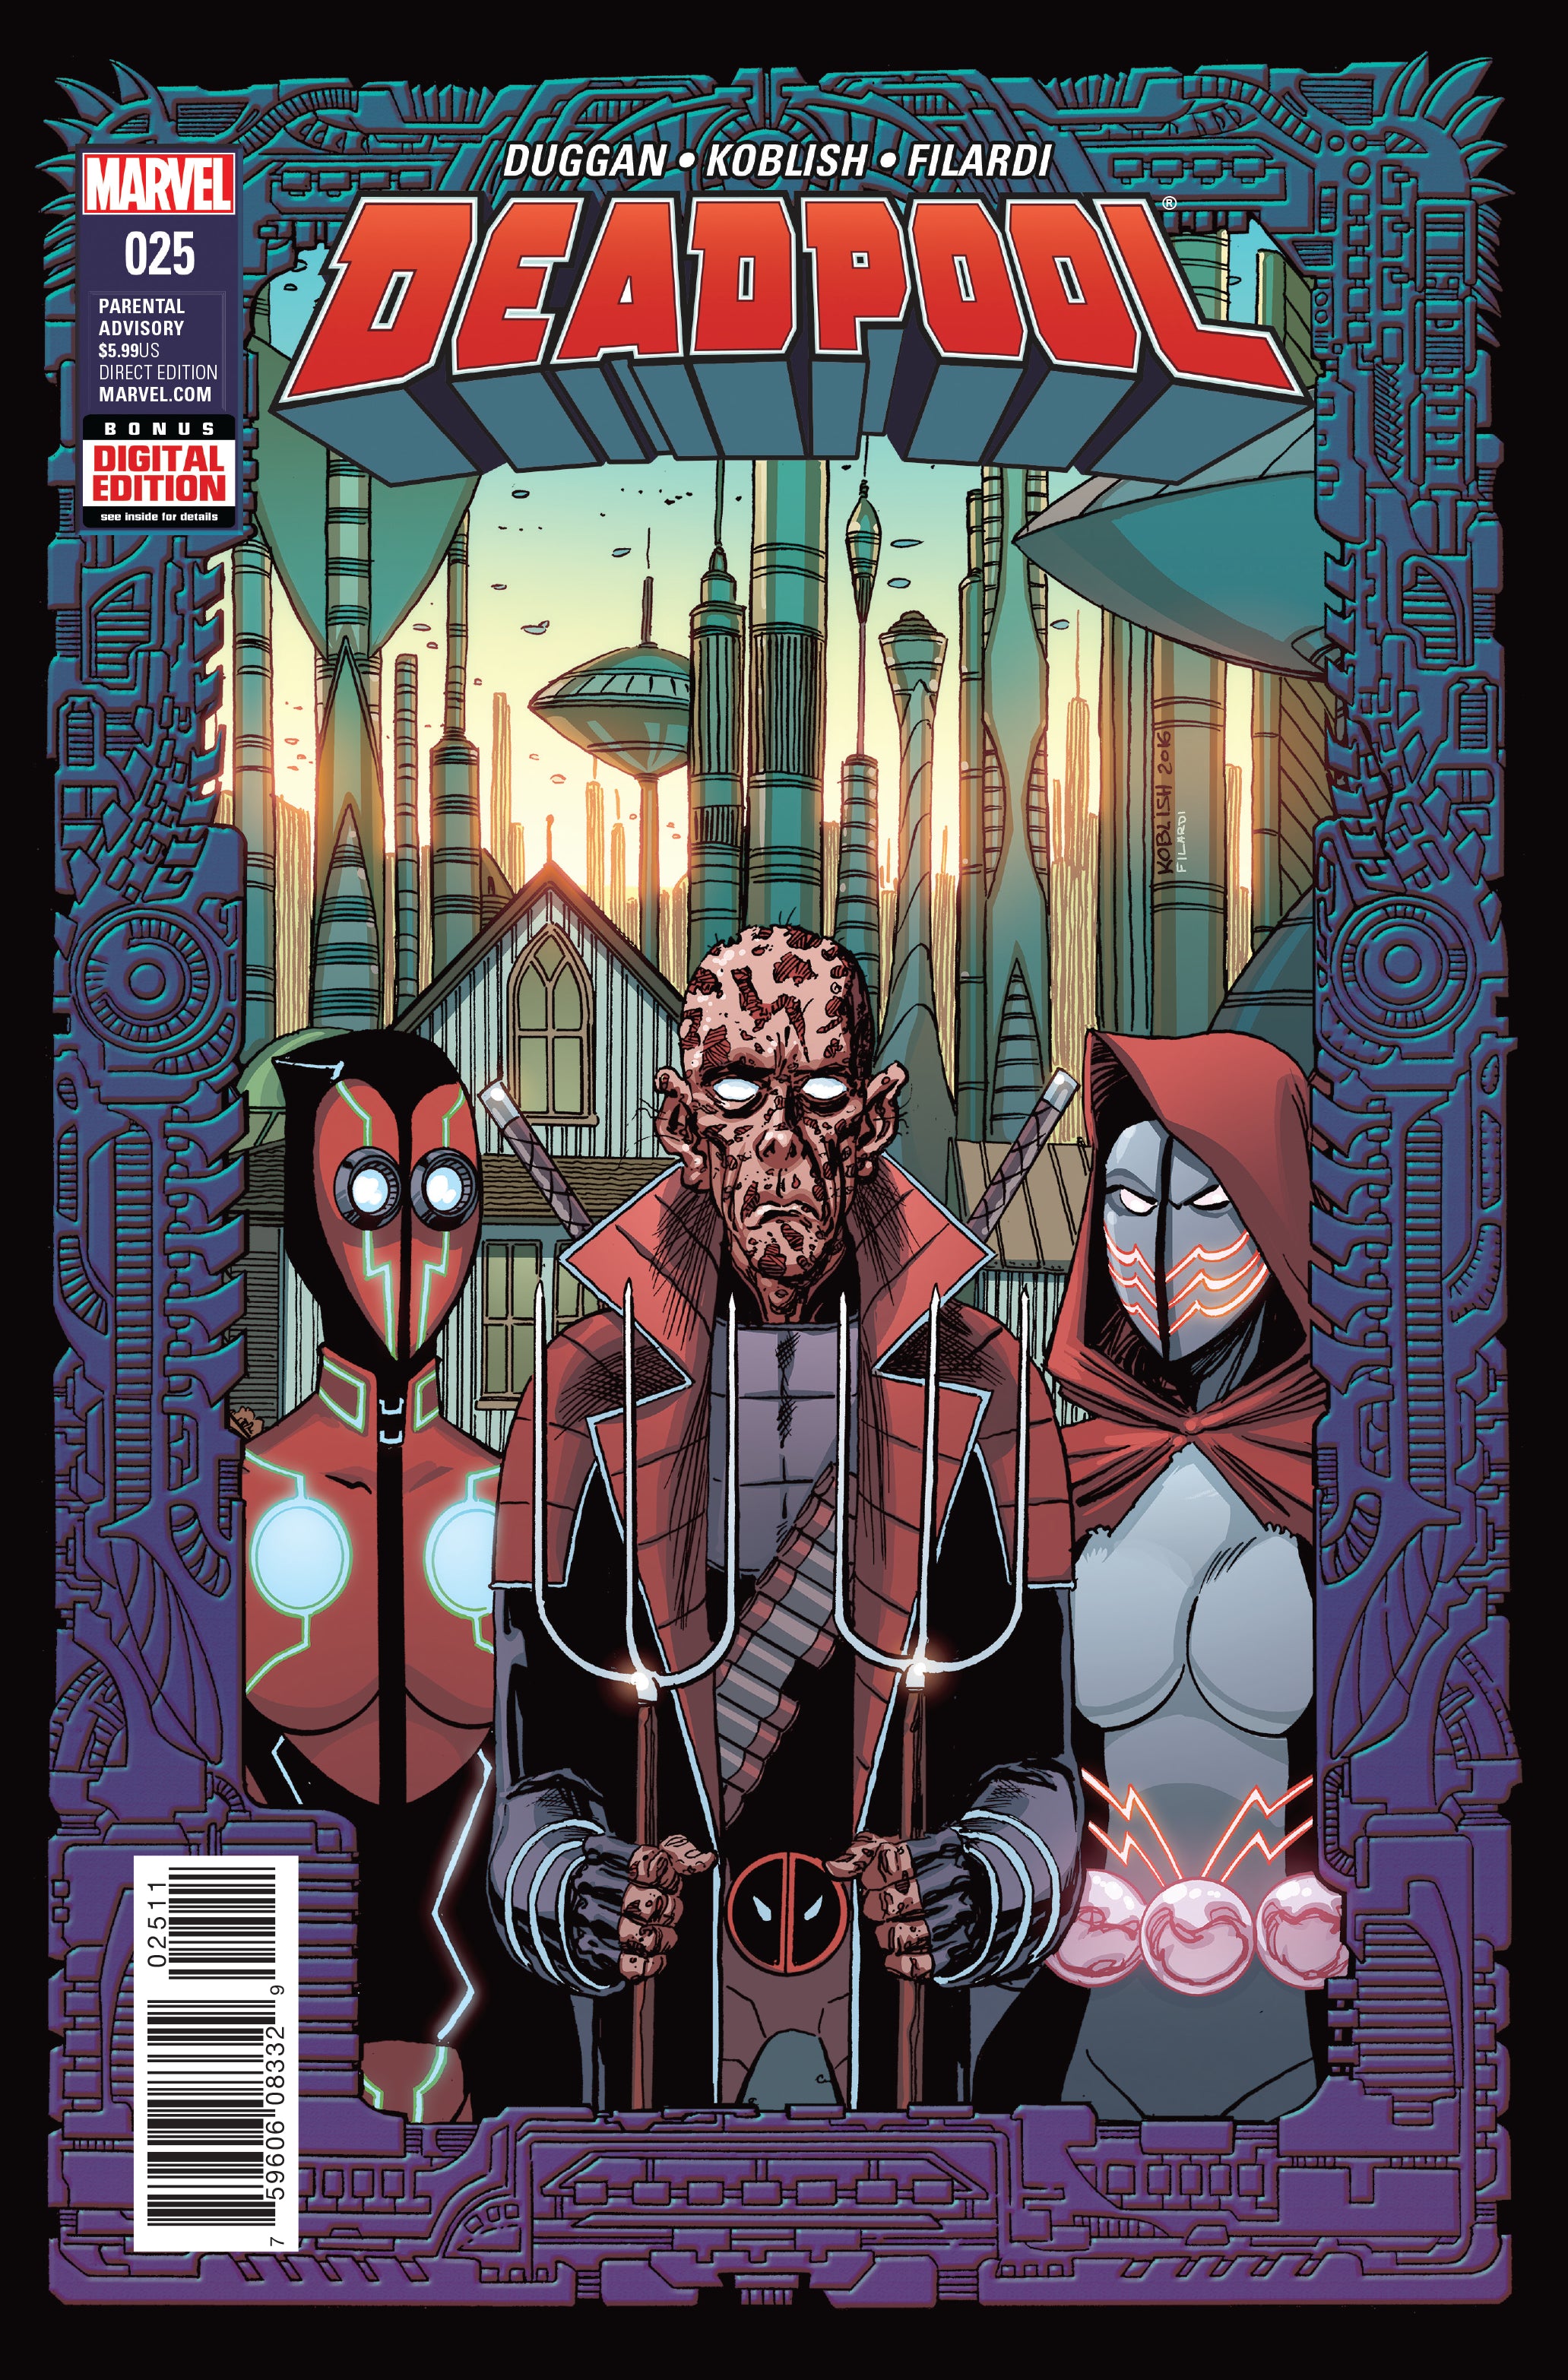 Photo of Deadpool Issue 25 comic sold by Stronghold Collectibles